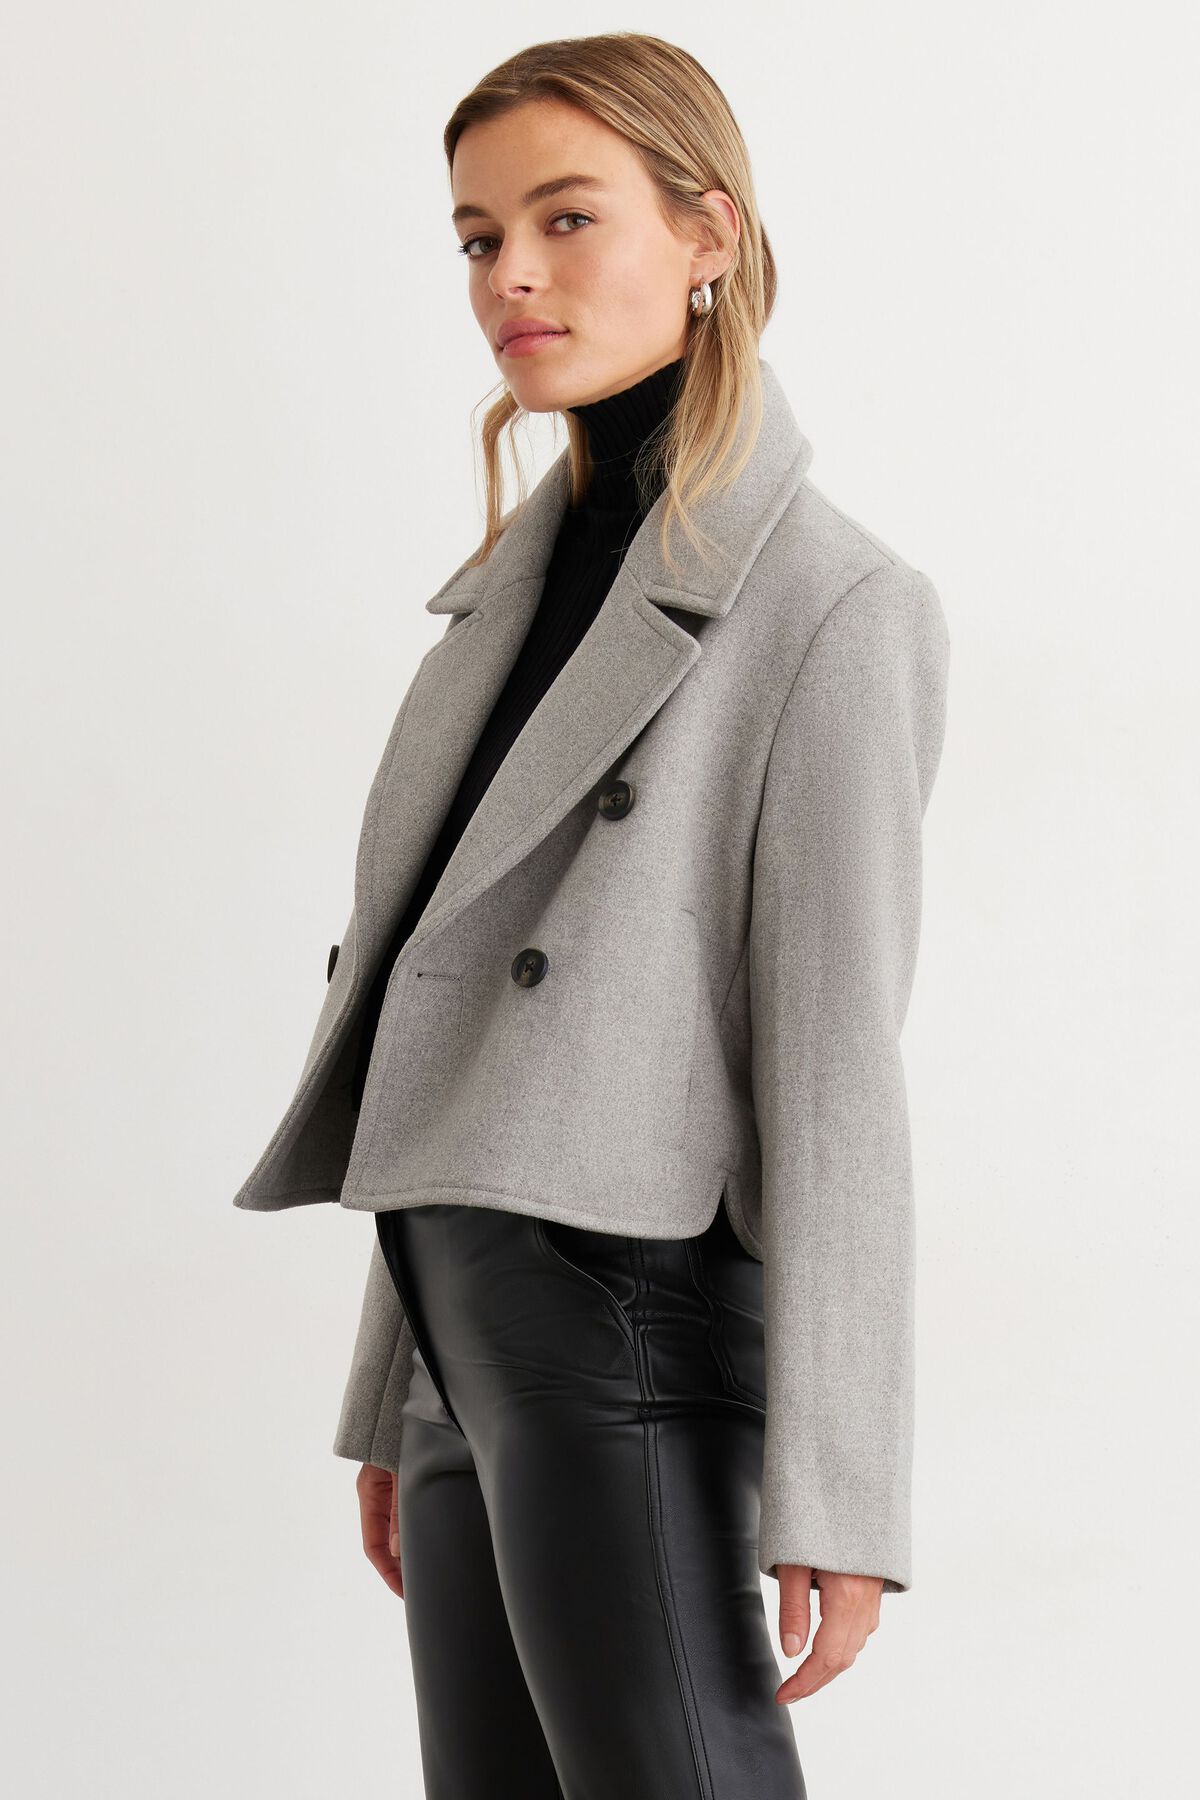 Dynamite Cropped Peacoat. 3